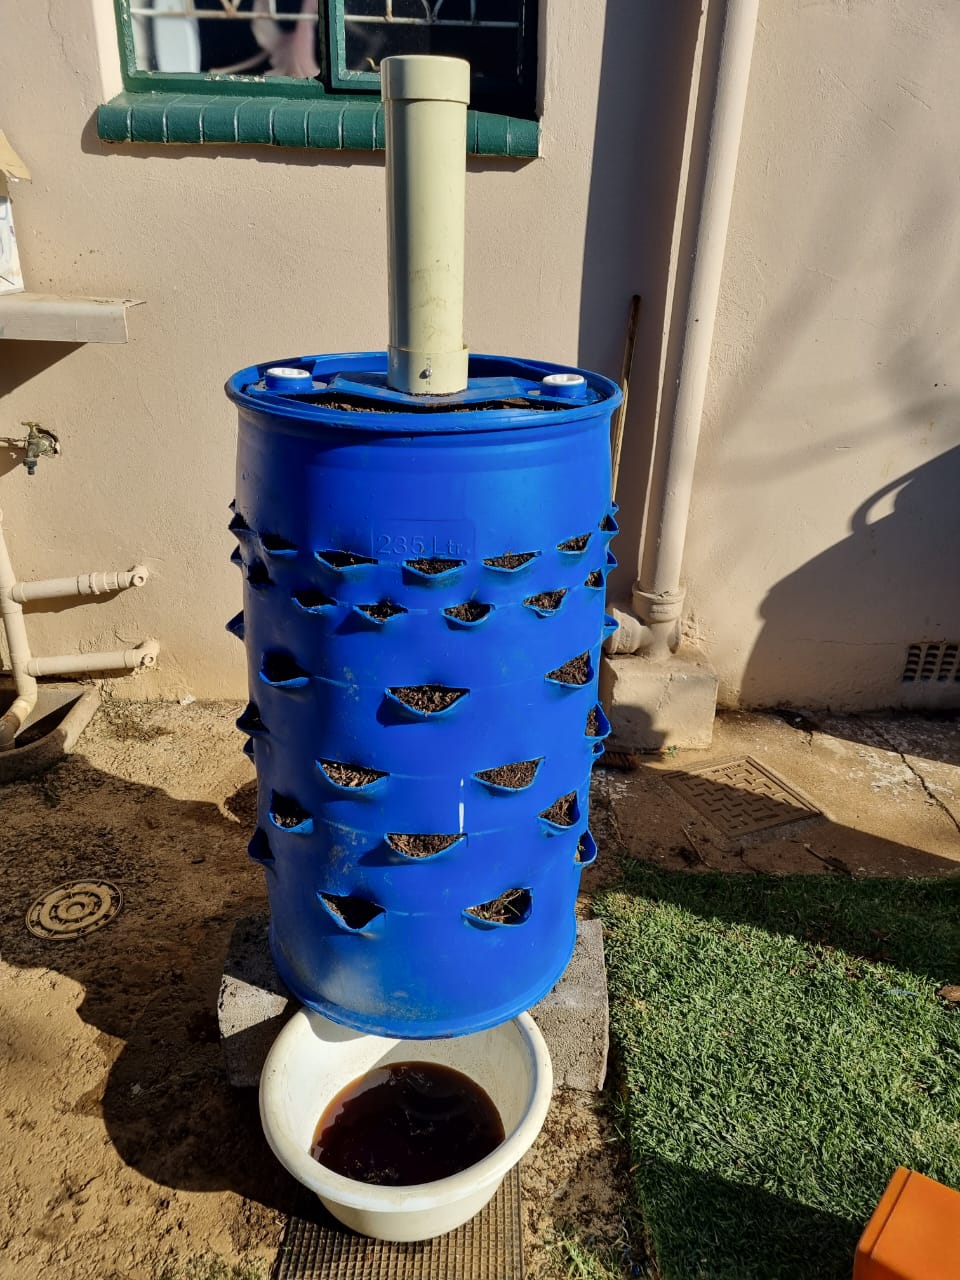 Plant barrel with worm or water pype